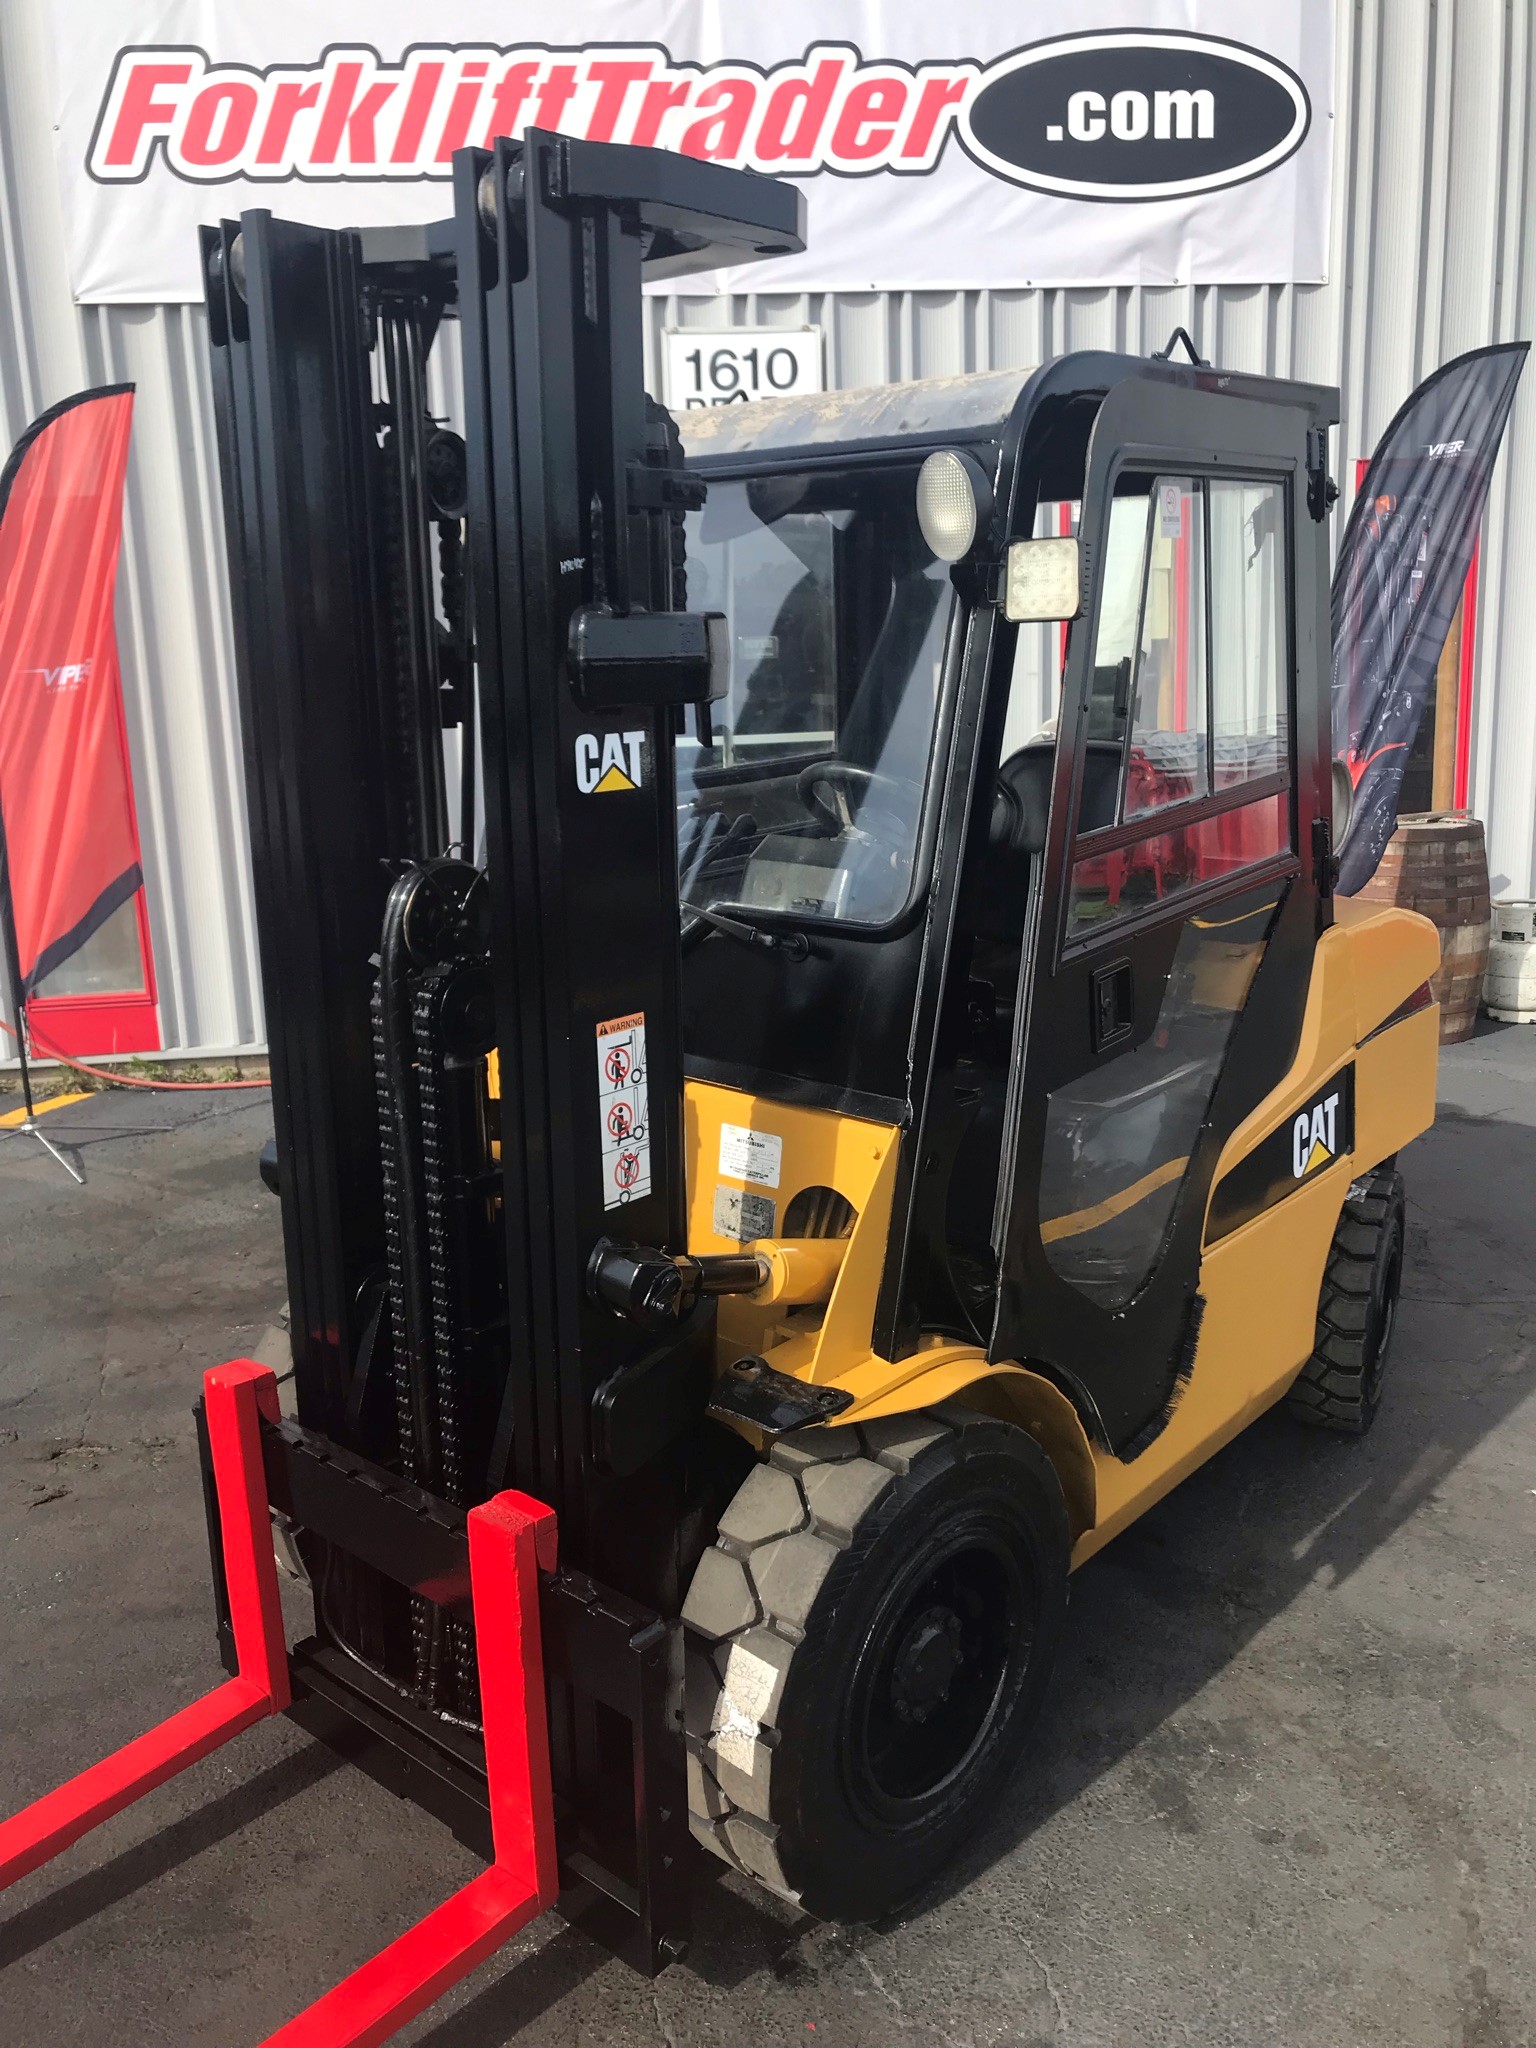 48" forks 2014 yellow caterpillar forklift for sale